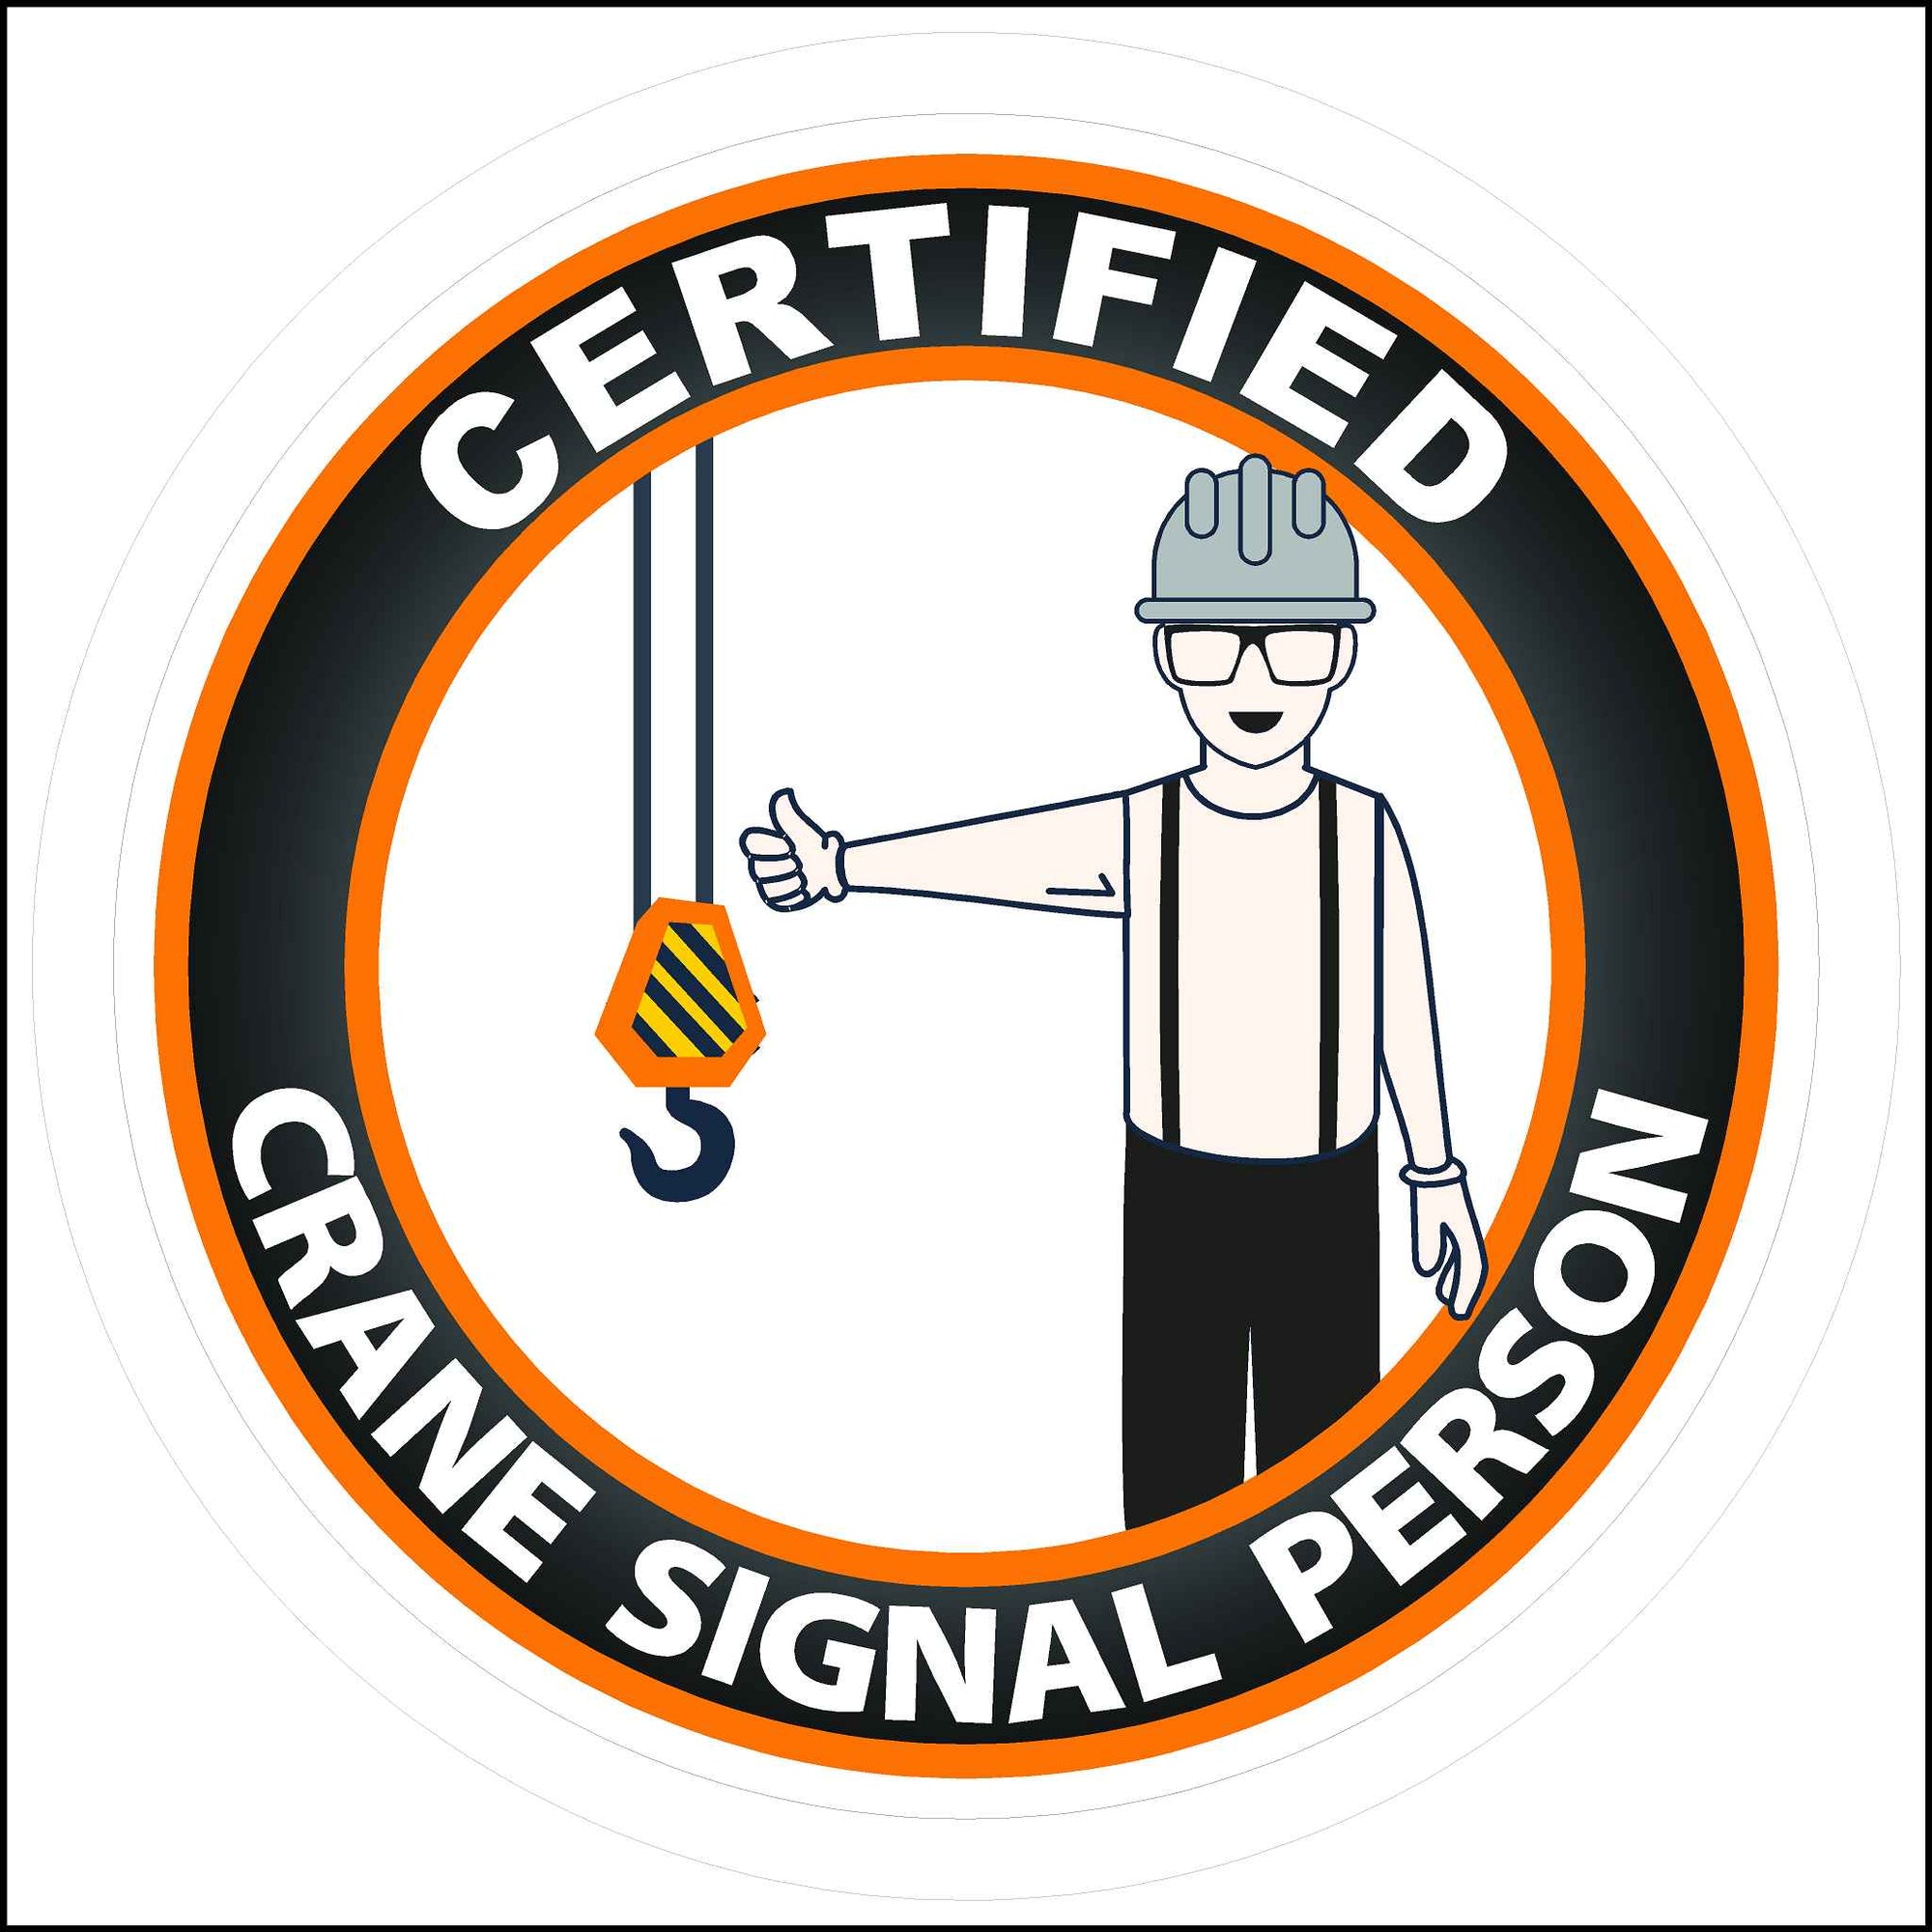 Certified Crane Signal Person Hard Hat Sticker. printed with a pictural of a safety worker giving the boom up signal.